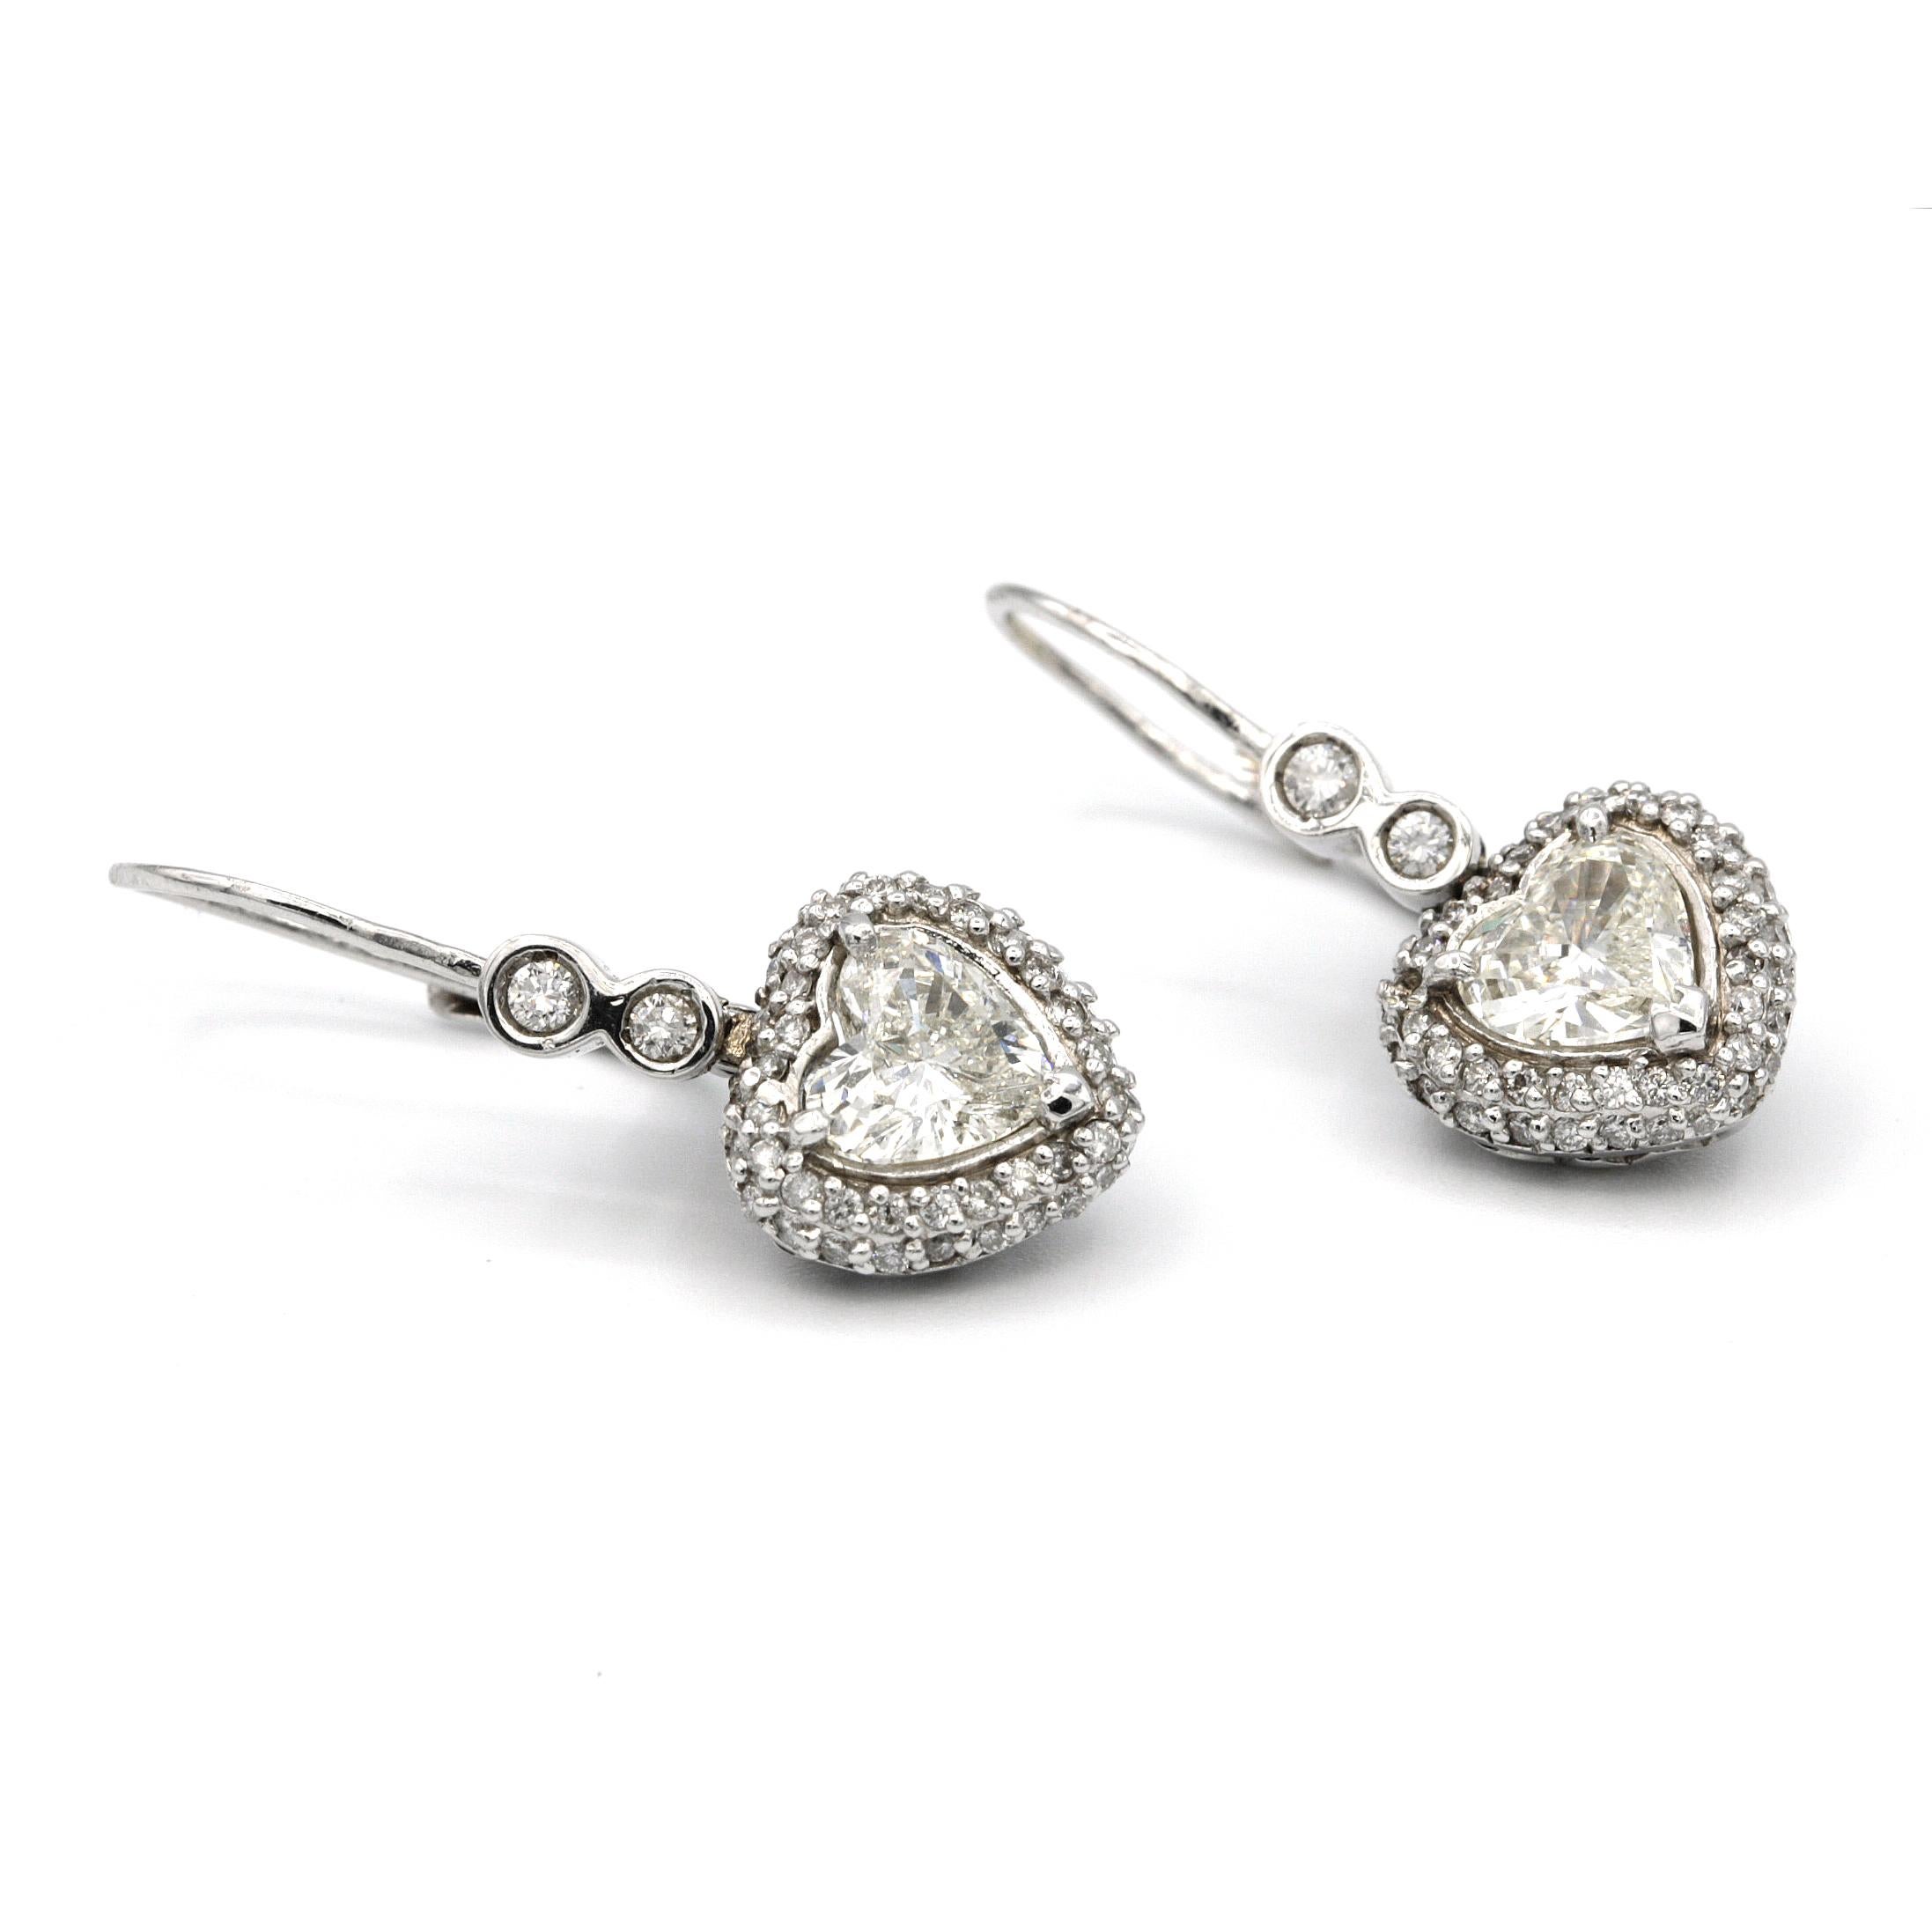 These 14 karat white gold dangling pair of Heart Shaped 1.74 Carat Earrings features two round diamonds weighing 0.05ct and 0.03ct on top. 
each heart shape diamond is surrounded by 50 white round diamonds of 0.01ct each.
3cm in Length and 1cm Width